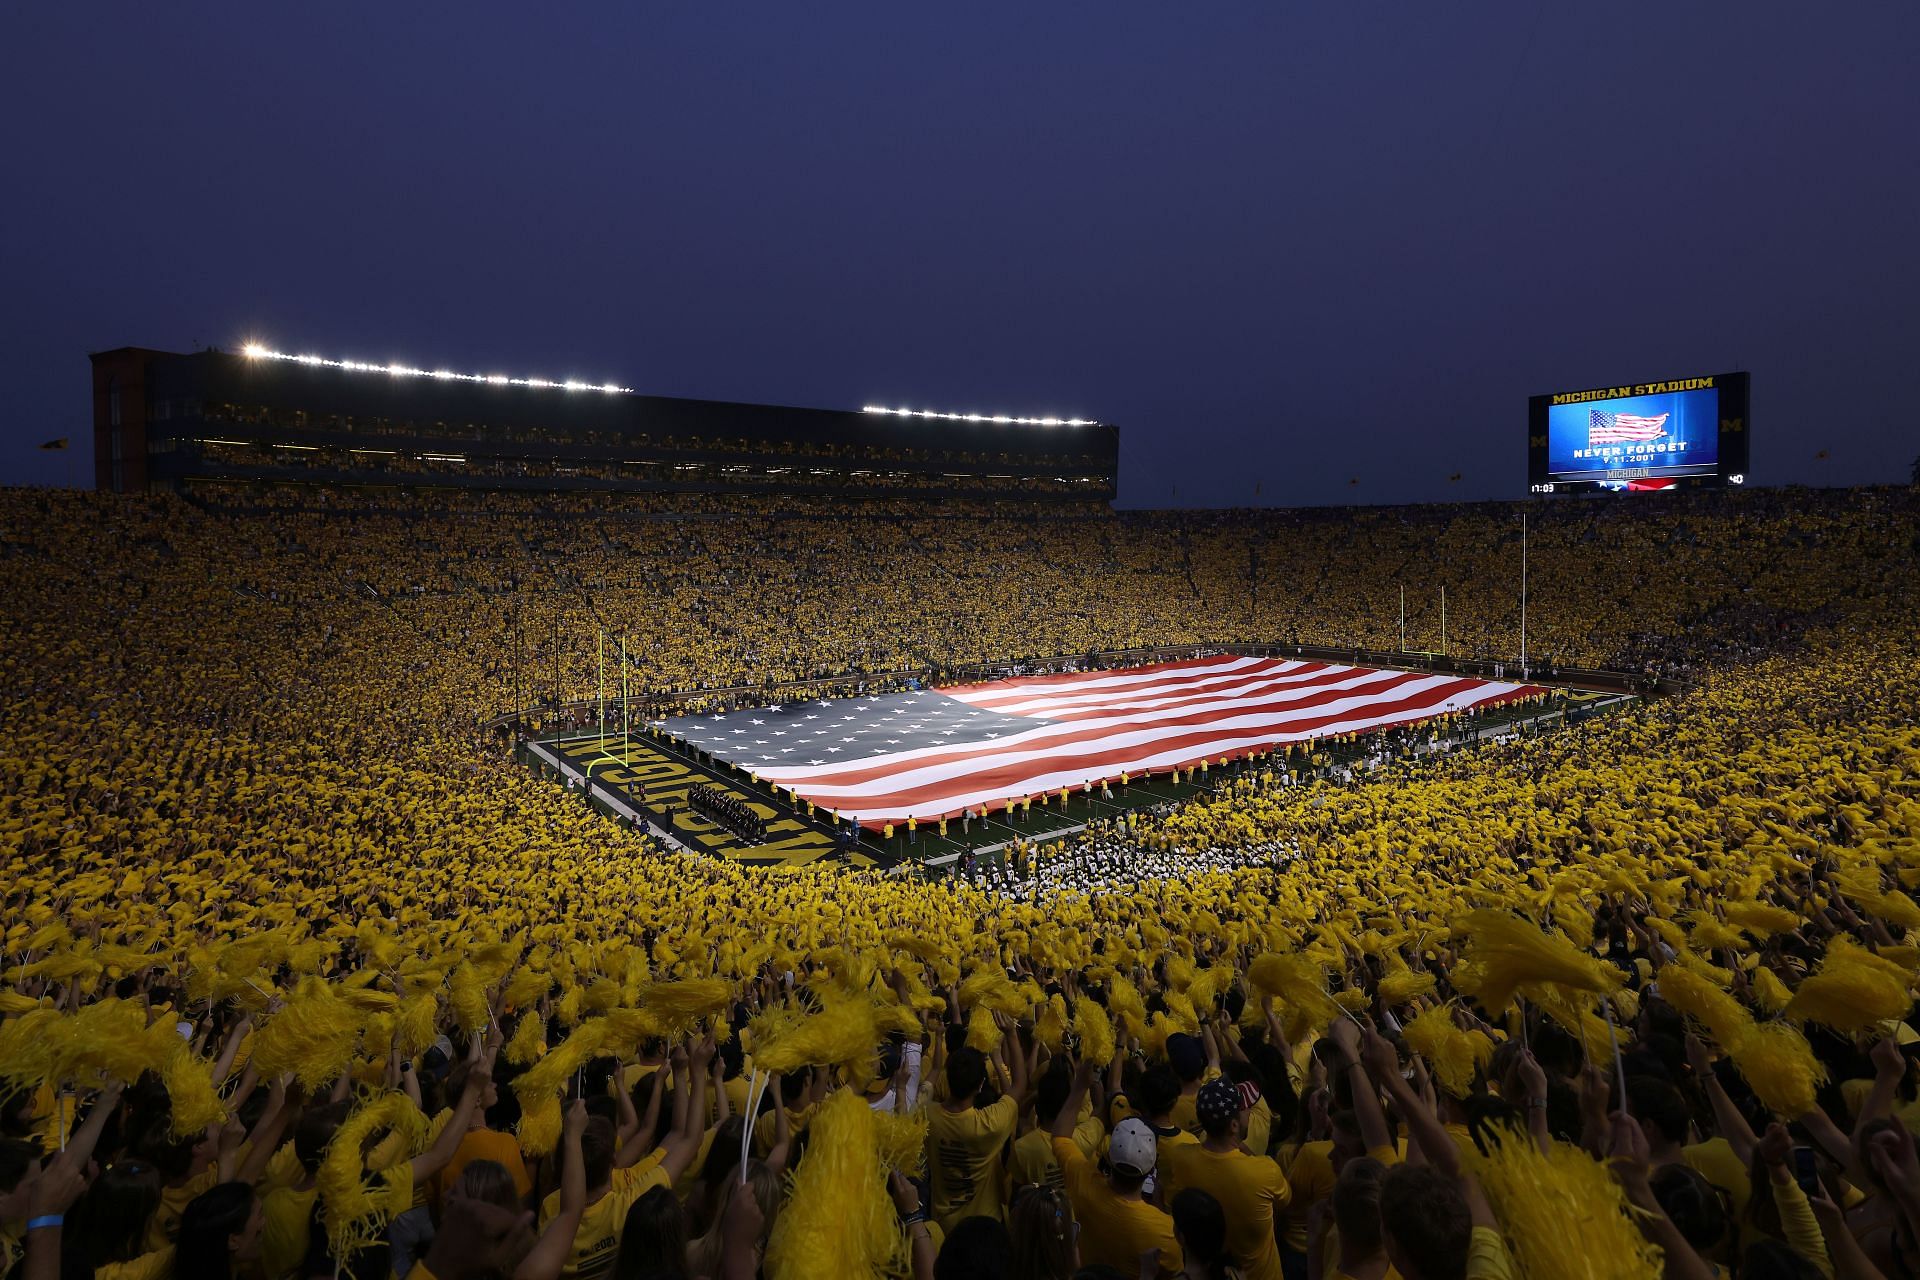 Why are College Football Stadiums usually bigger than NFL Stadiums?